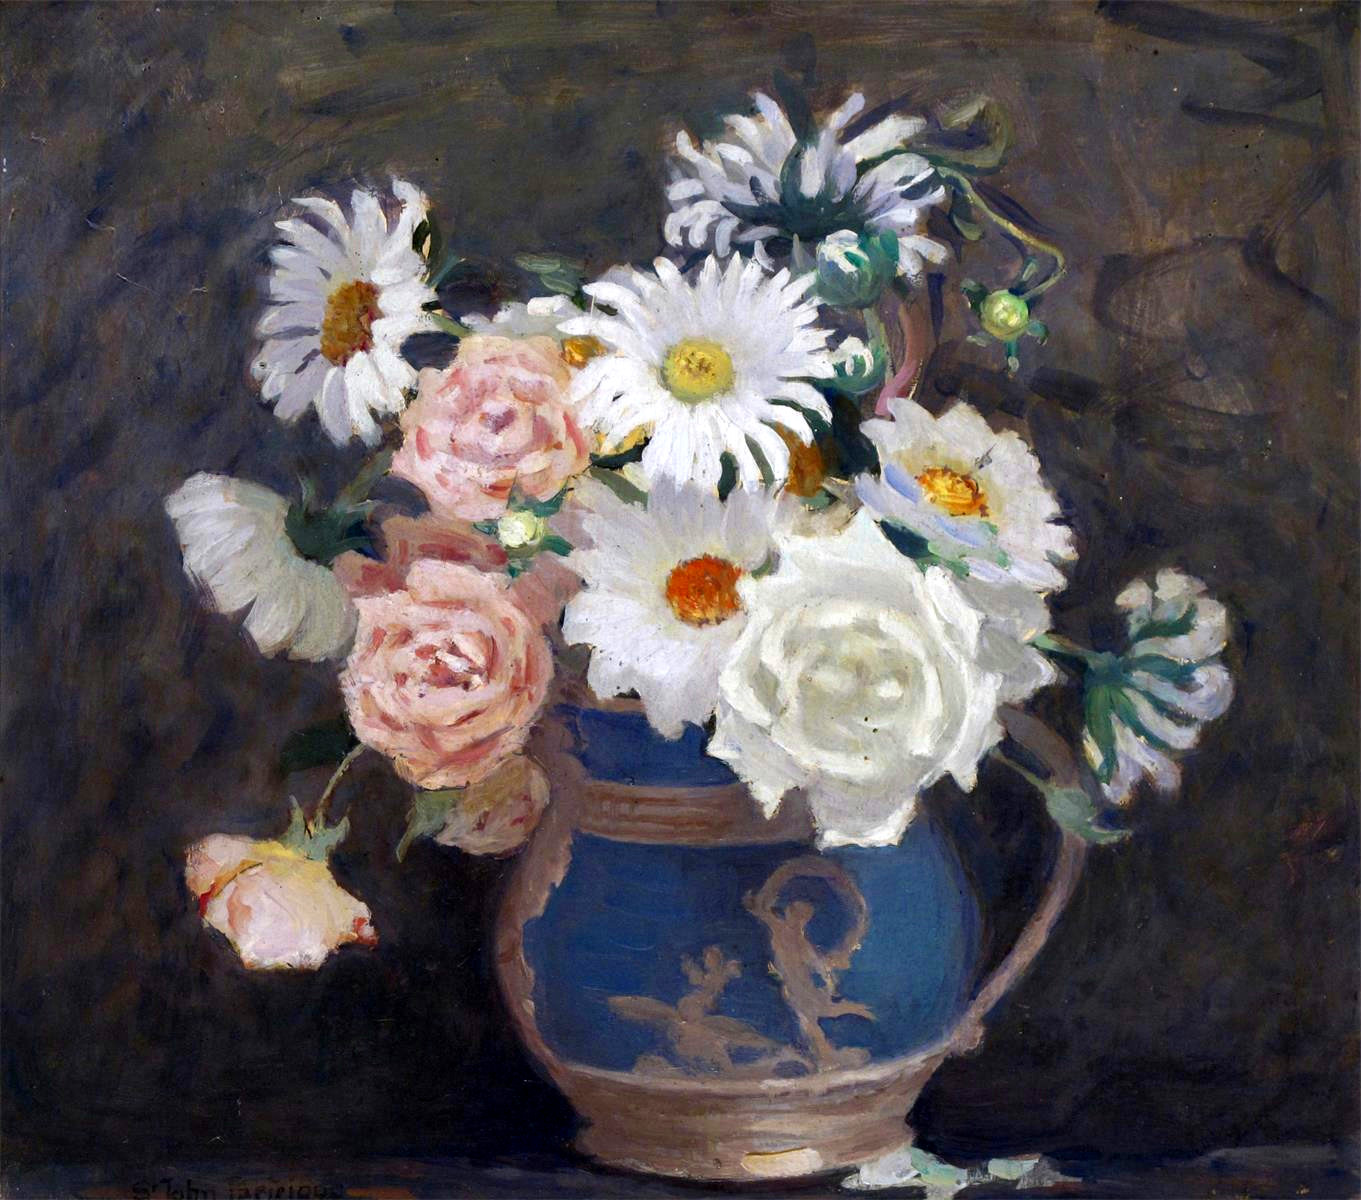 Roses and Daisies in a Jug